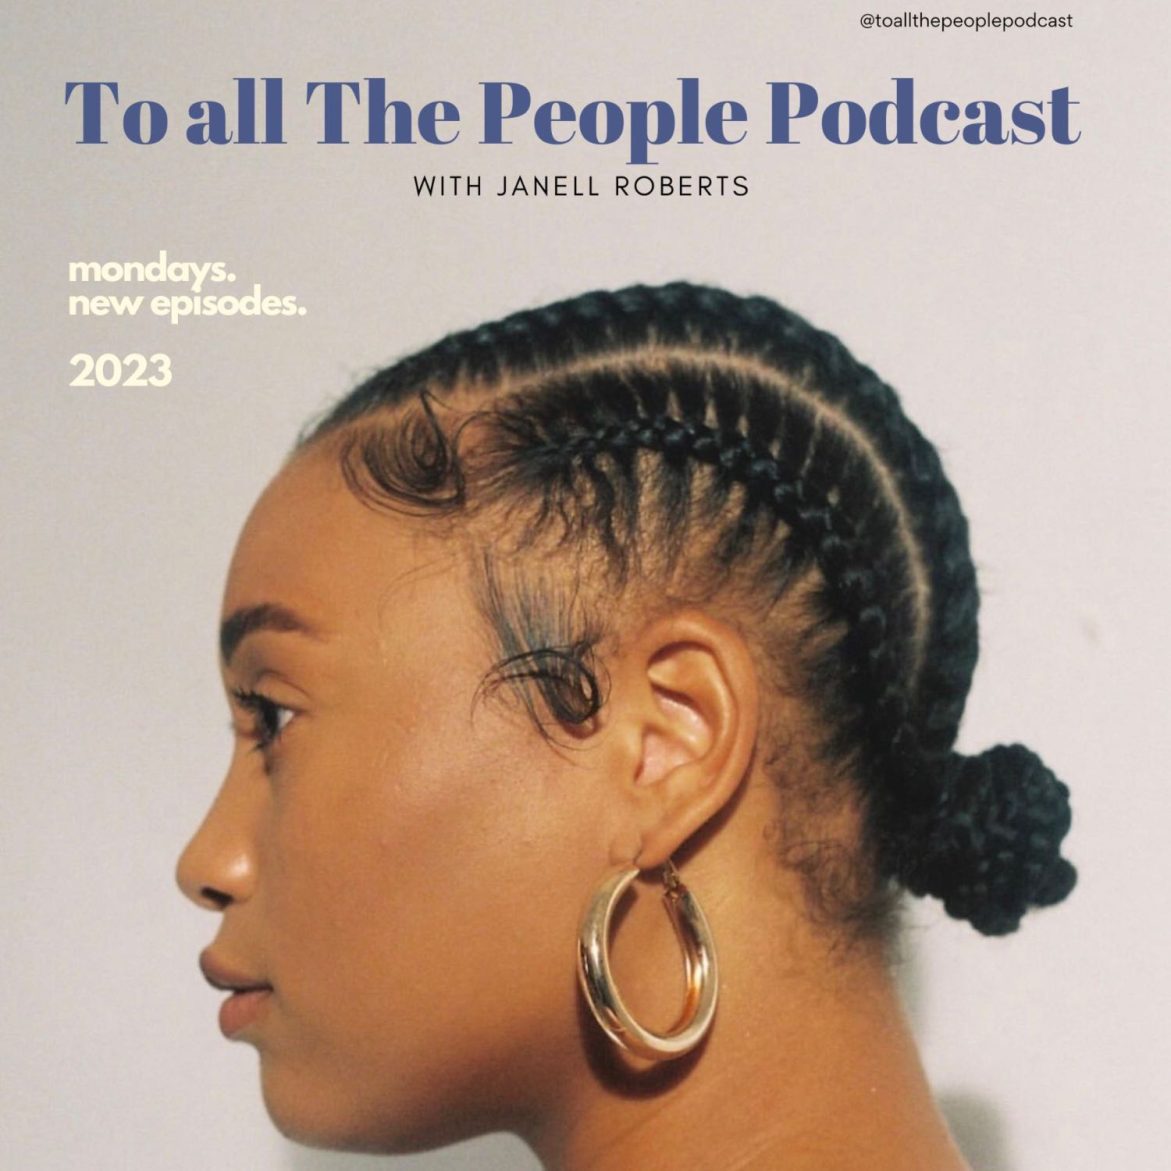 Black Podcasting - Everything you want IS ALREADY WITHIN YOU, so start acting like the MAIN CHARACTER not the supporting one